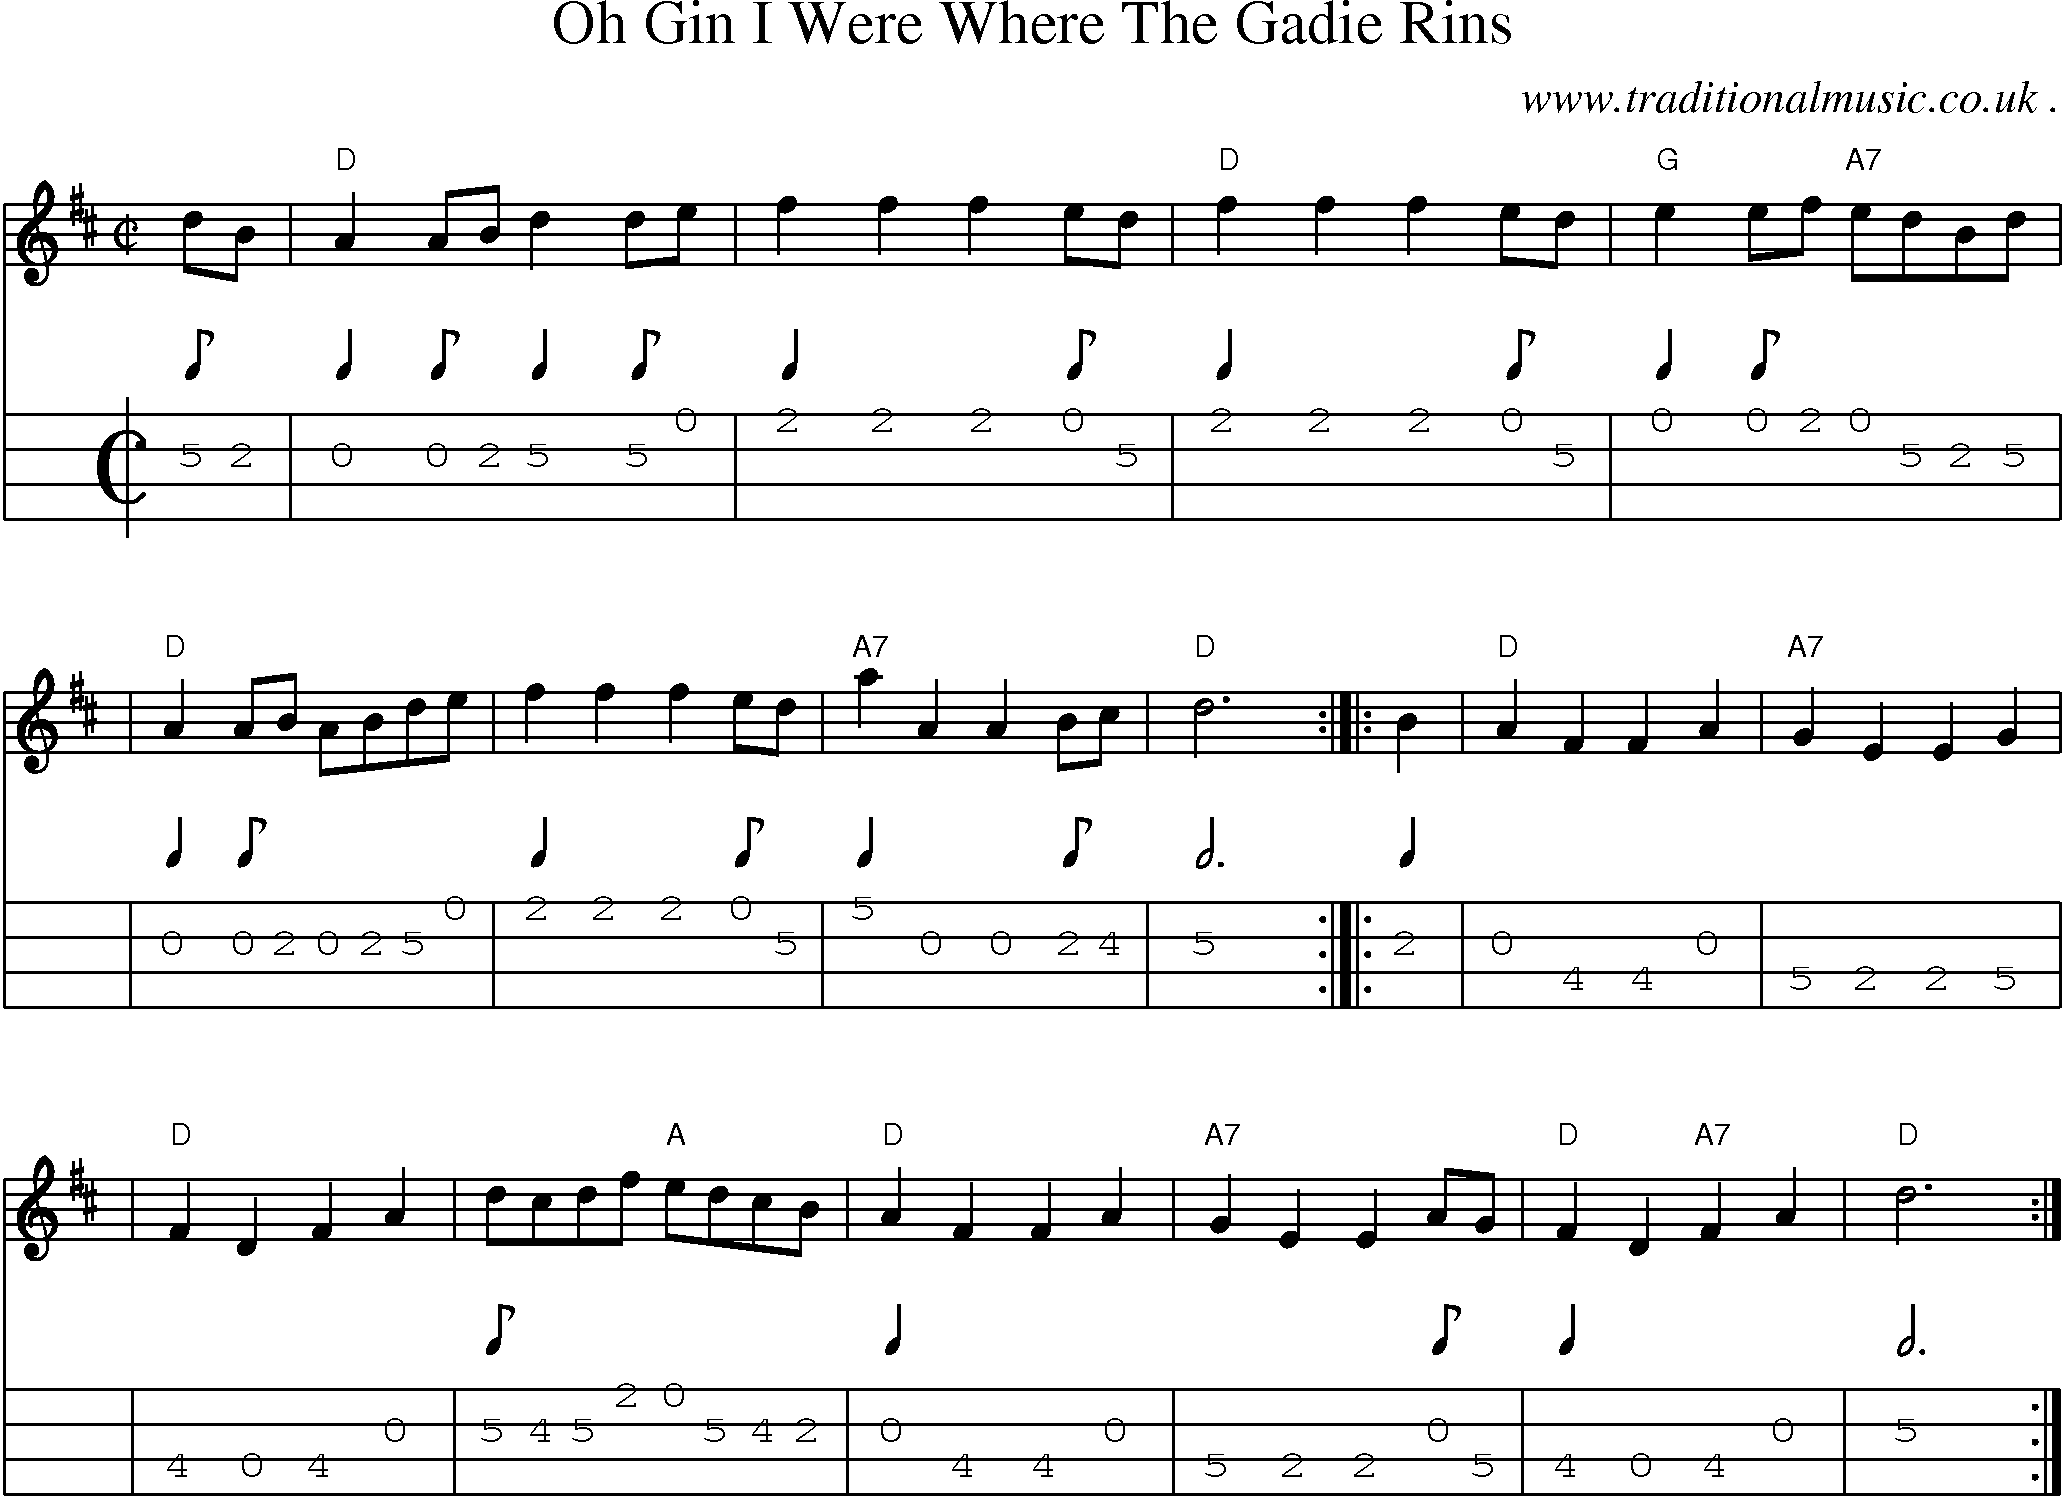 Sheet-music  score, Chords and Mandolin Tabs for Oh Gin I Were Where The Gadie Rins